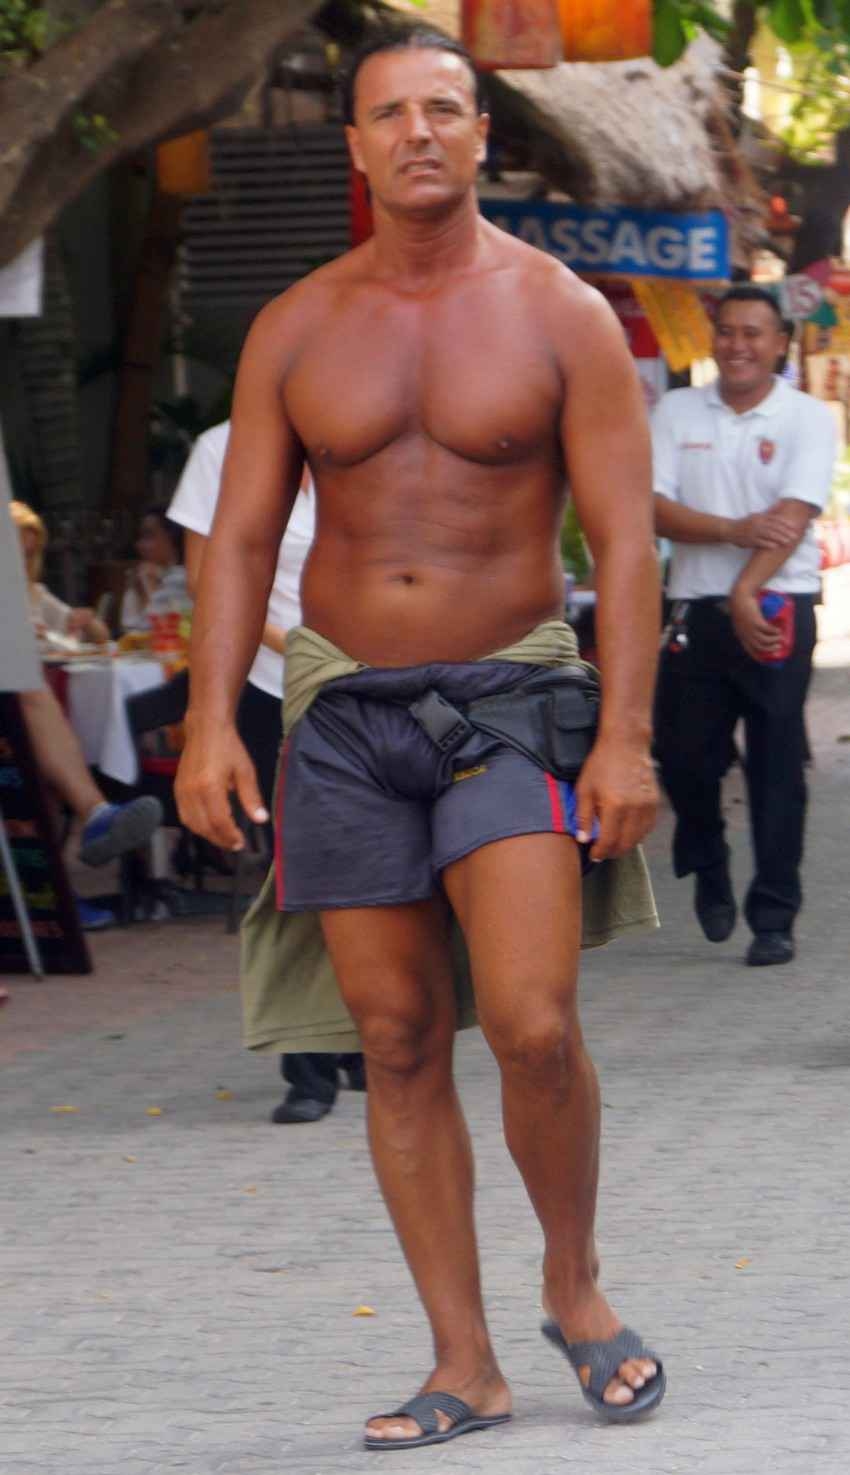 A darkly tanned and muscular man not wearing a shirt.